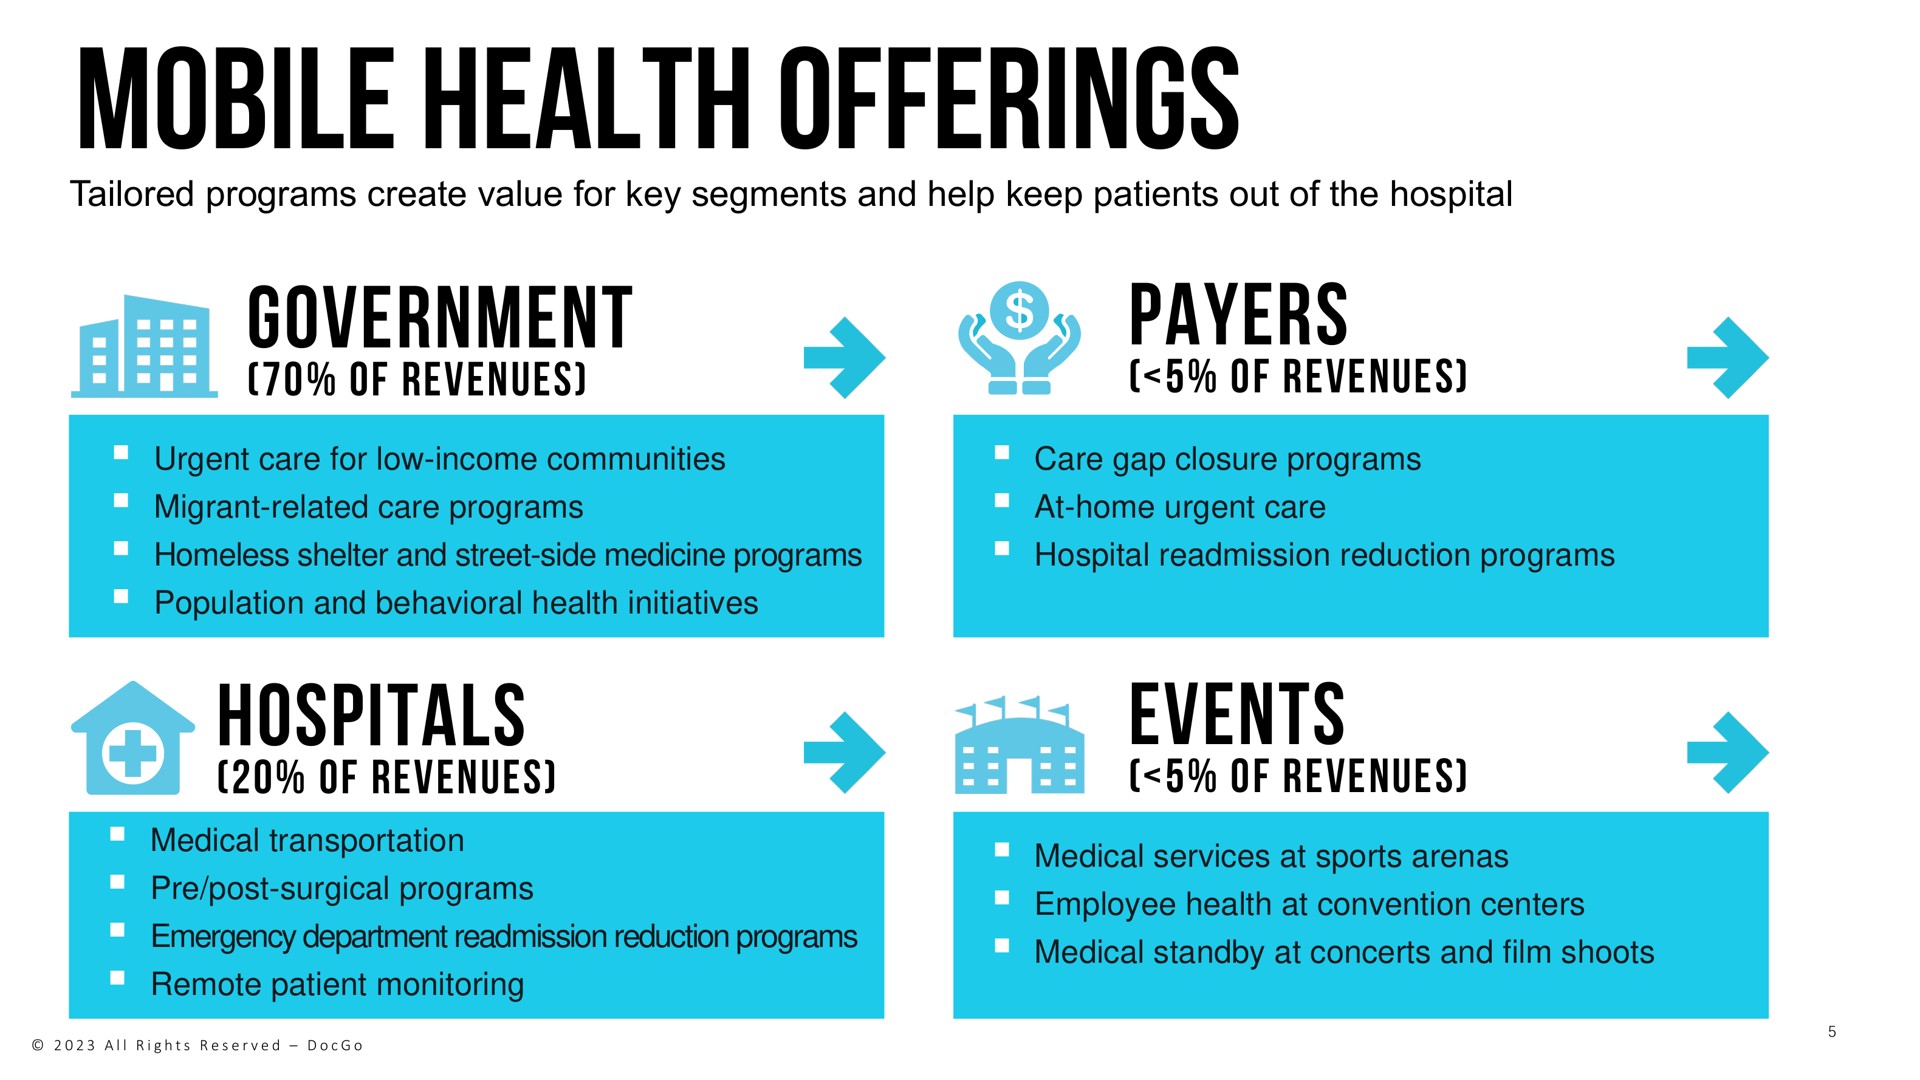 mobile health offerings government hospitals payers events of revenues of revenues of revenues of revenues | DocGo